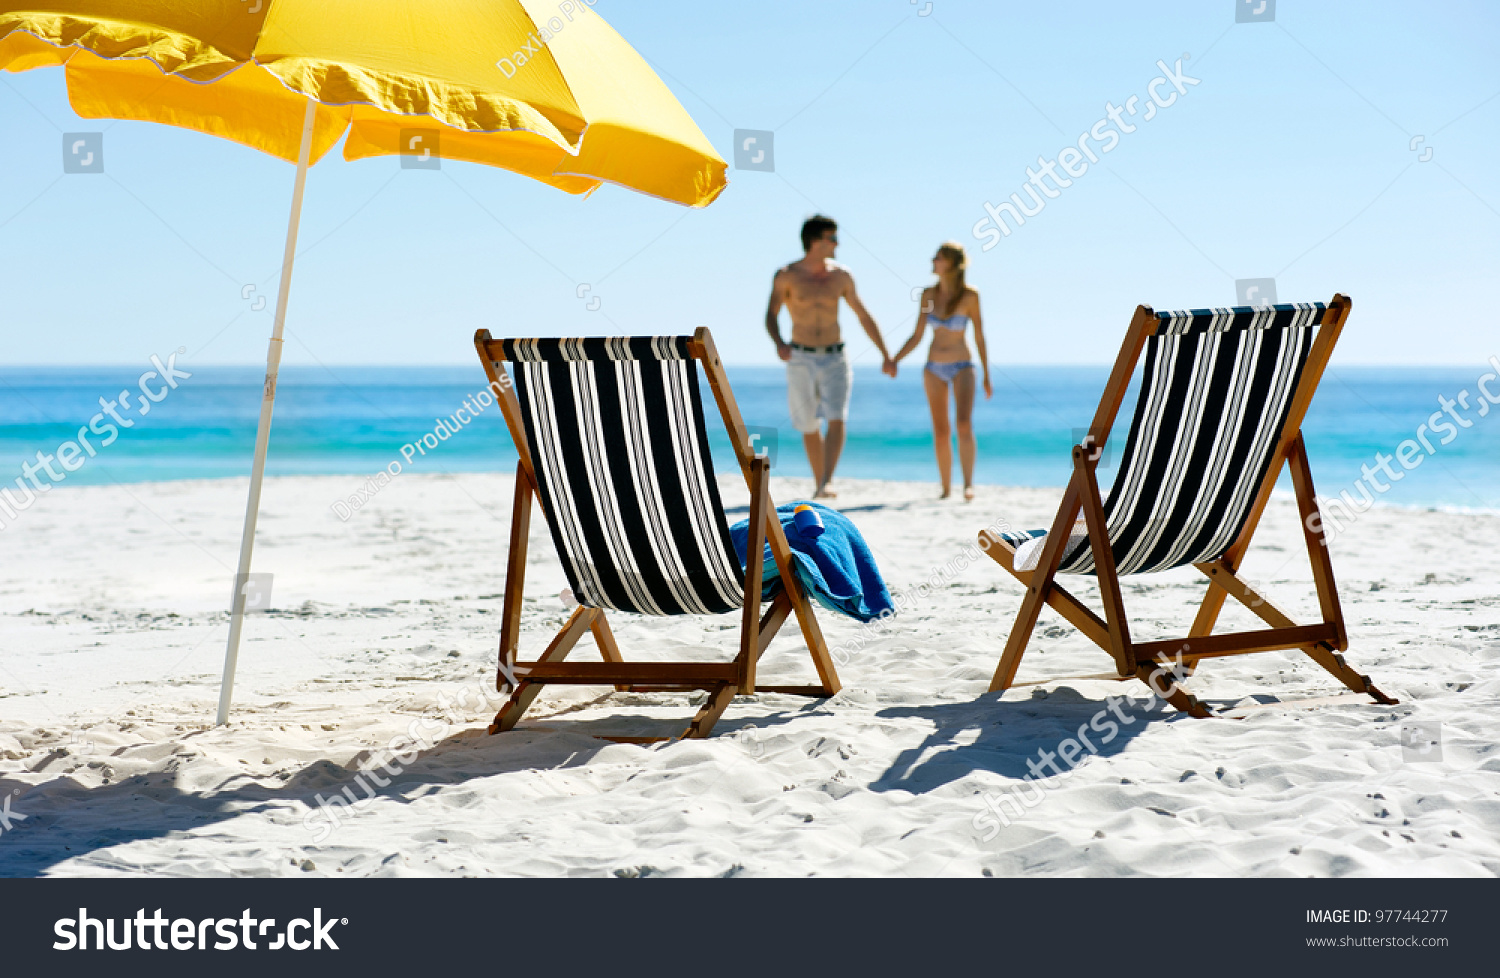 Tropical summer beach holiday couple walk towards the ocean holding hands while on honeymoon vacation #97744277